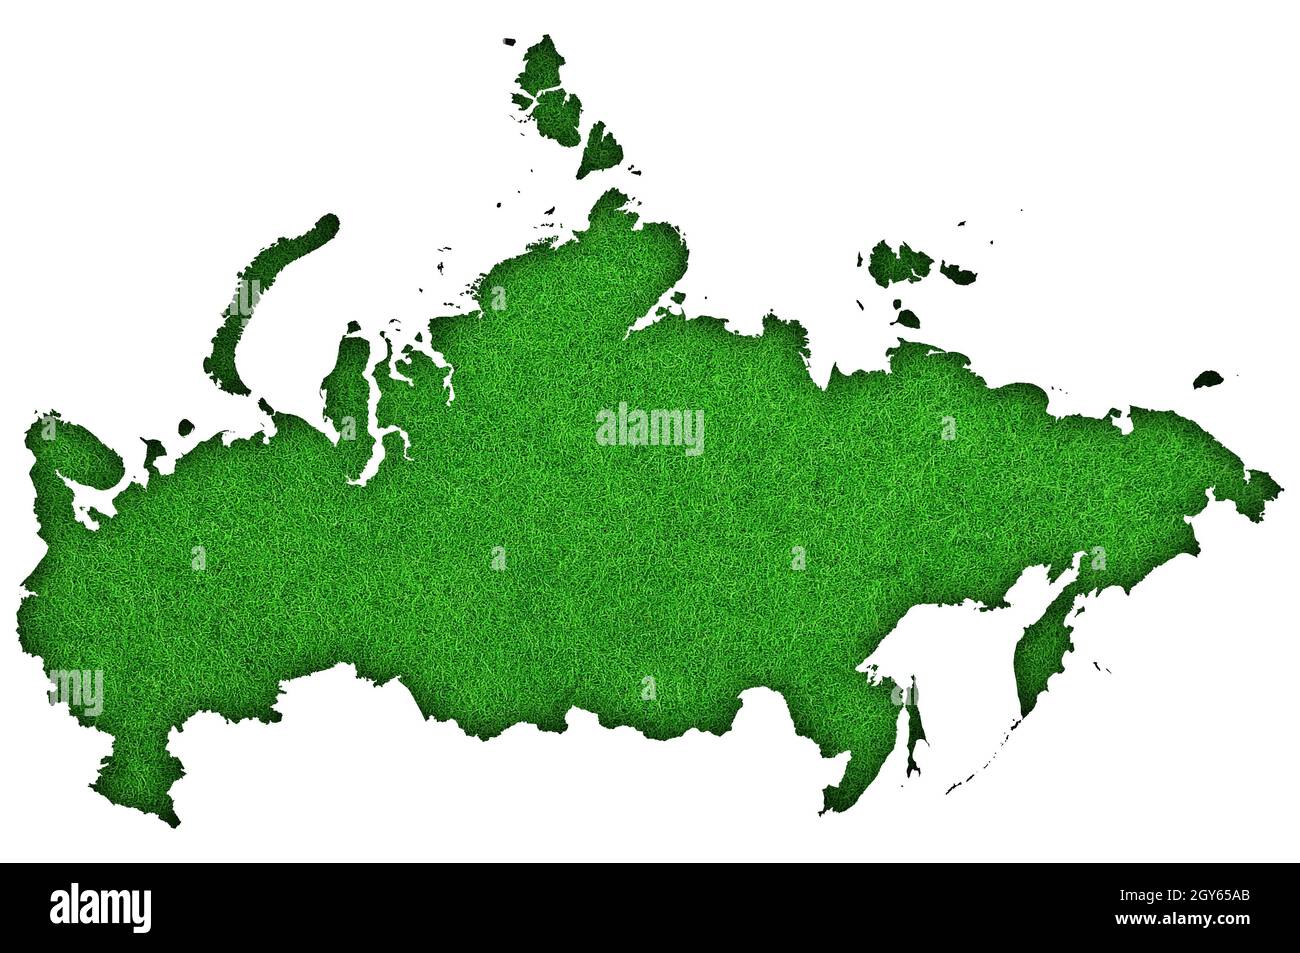 Map of Russia on green felt Stock Photo